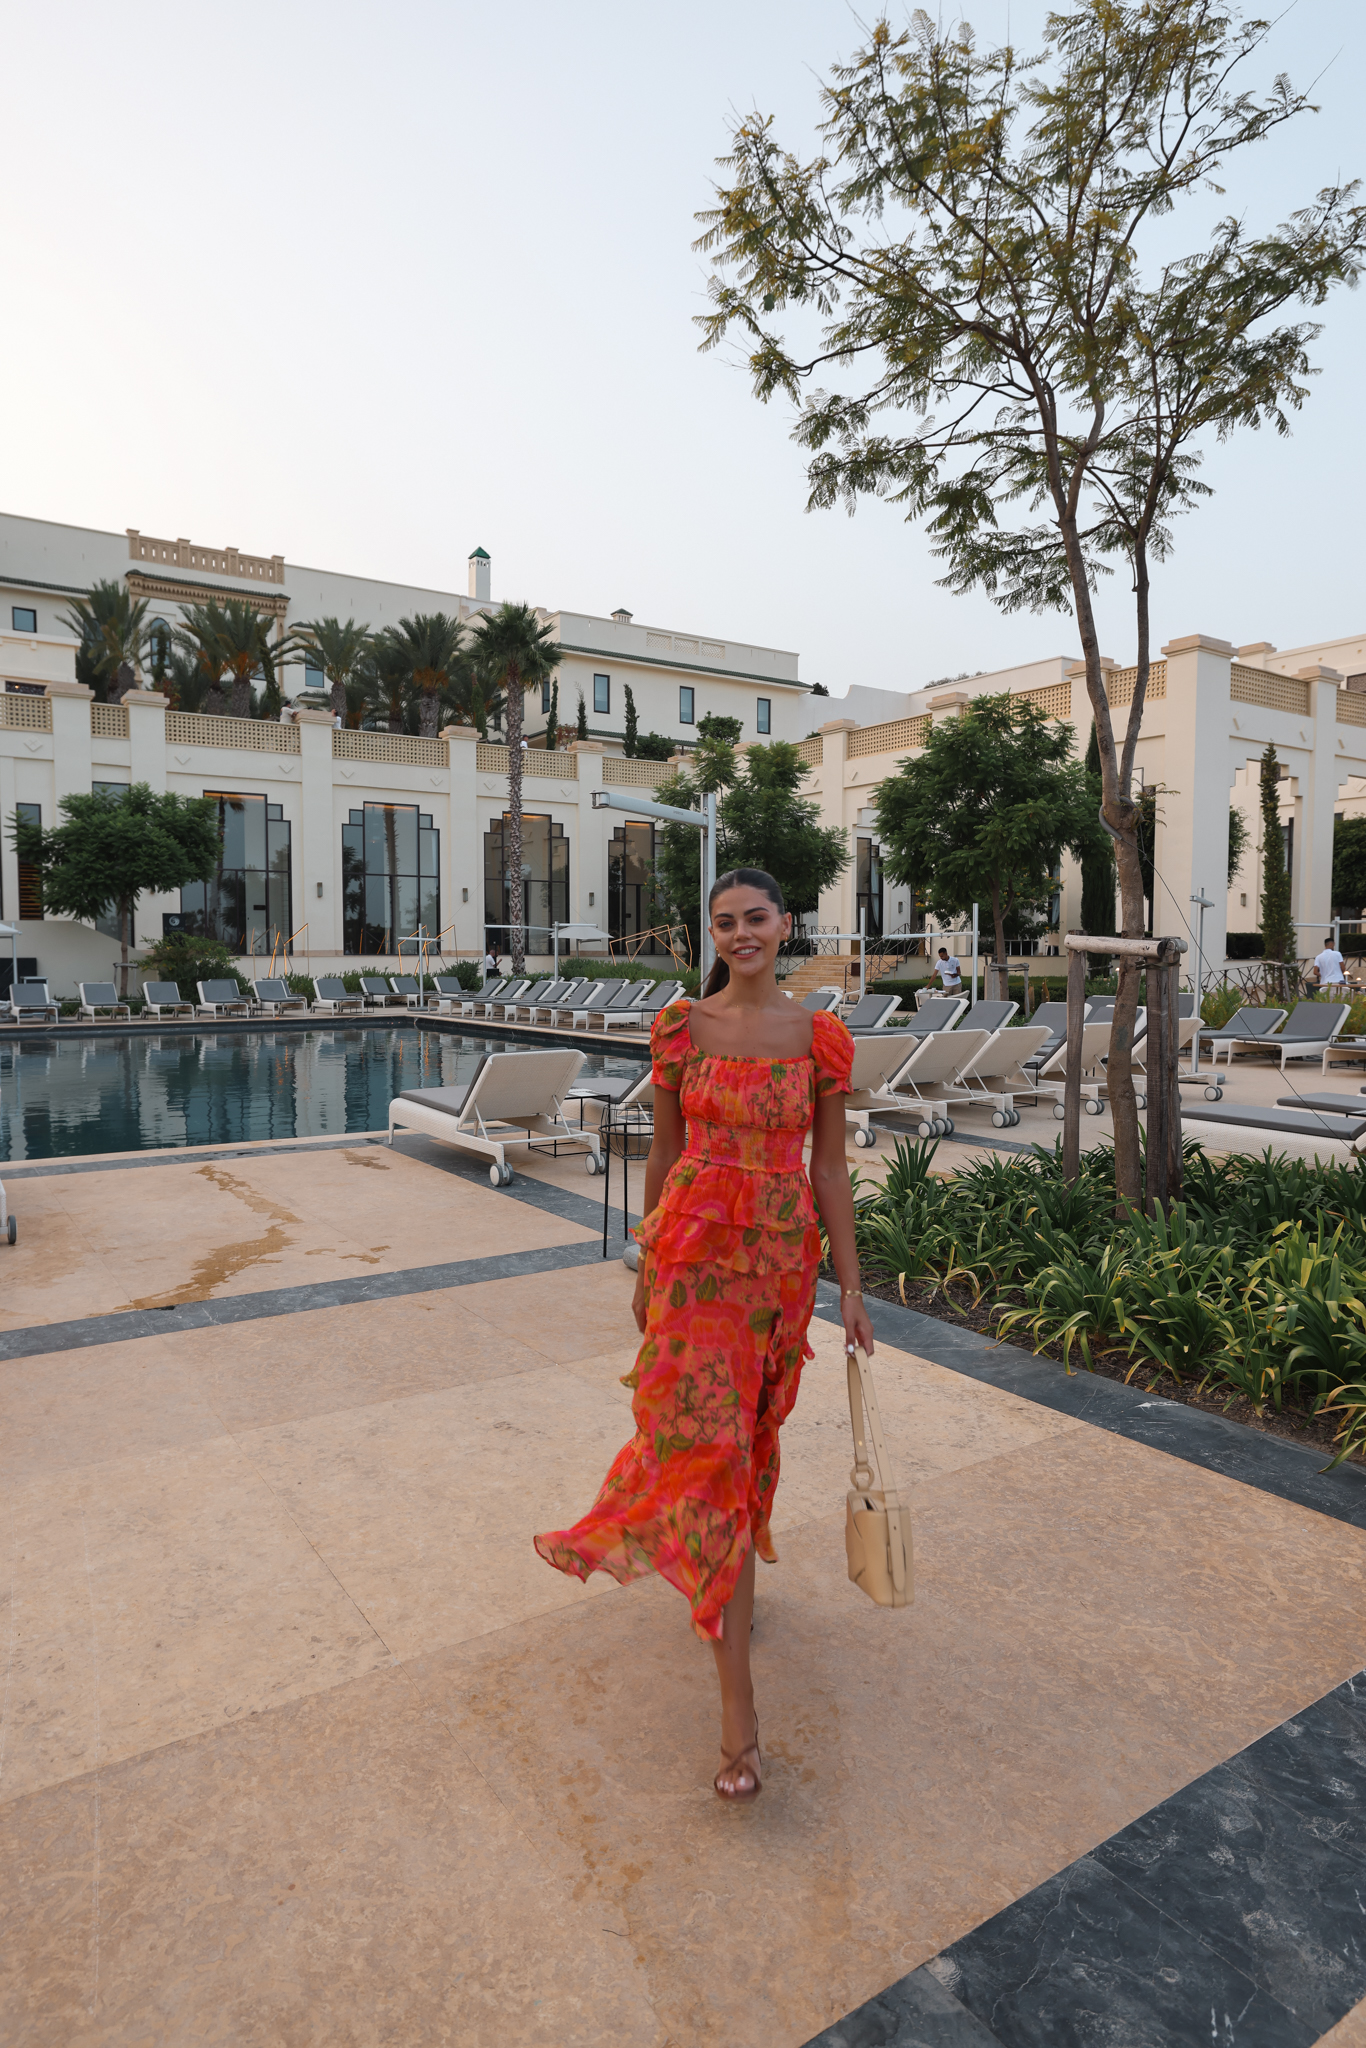 My Stay at The Fairmont Hotel in Tangier, Morocco